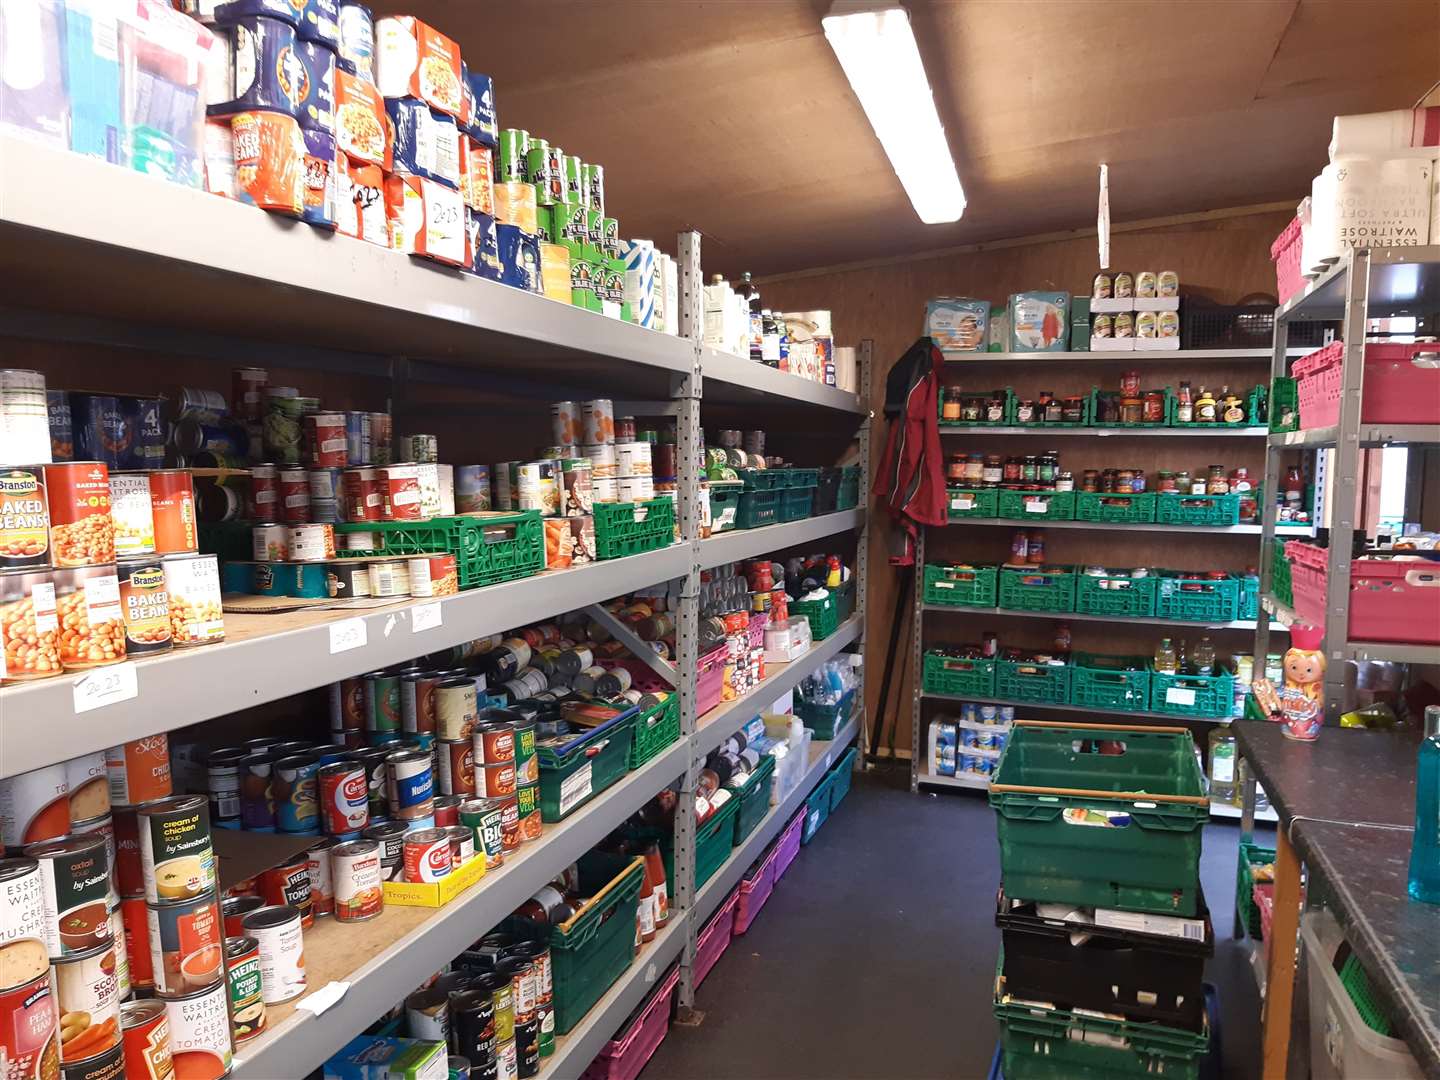 Homeless Care runs a foodbank from Maidstone Day Centre, for the homeless and those in need